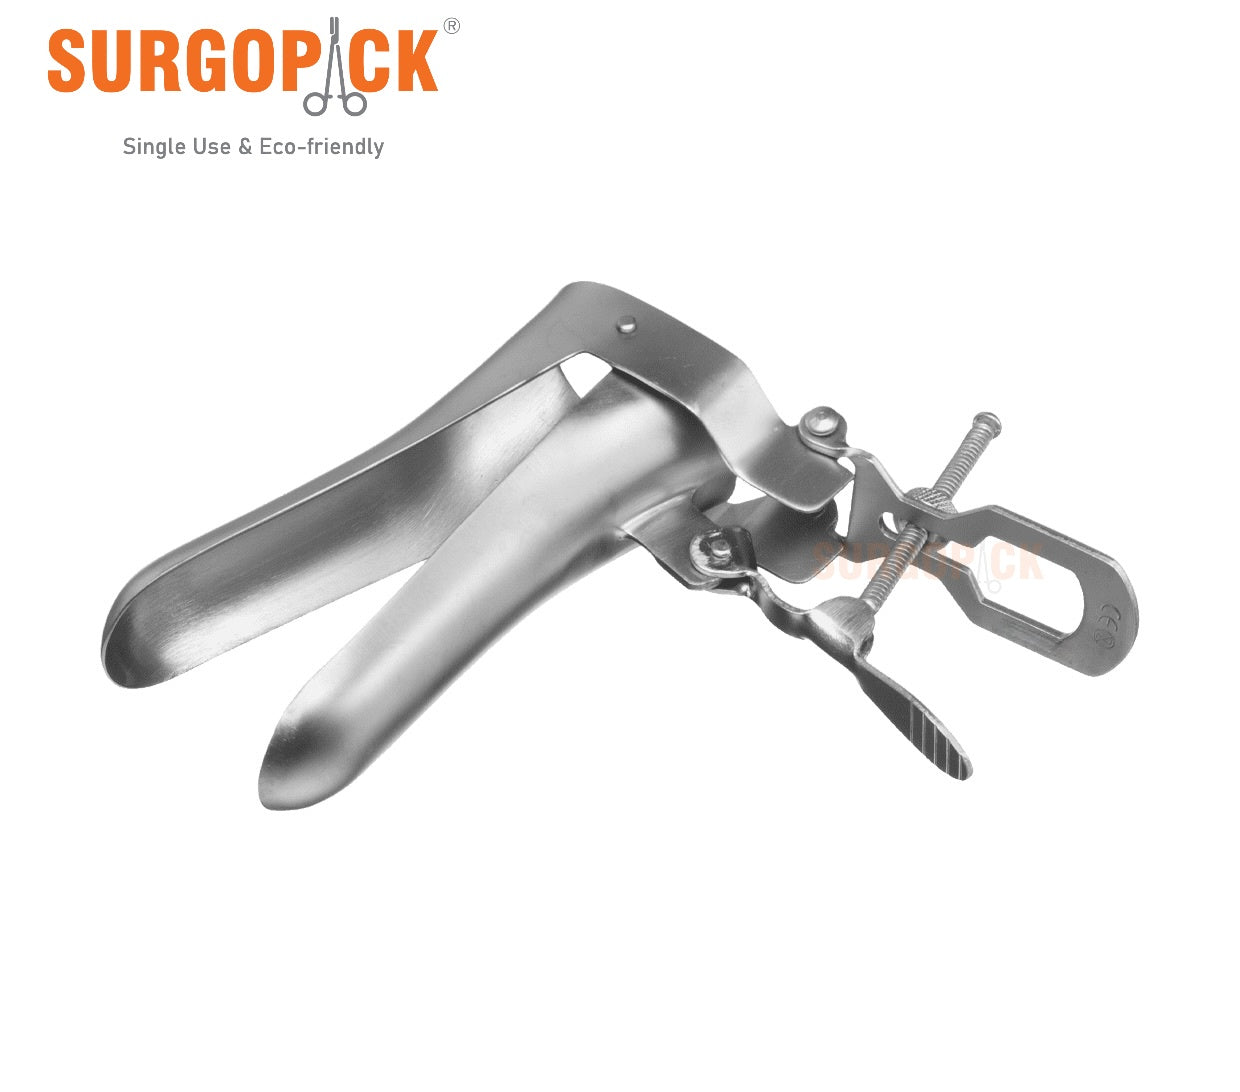 Box 20 Surgopack® Sterile Single Use Cusco Vaginal Speculum Medium Size Individually Packed Stainless Steel - EmpireMedical 